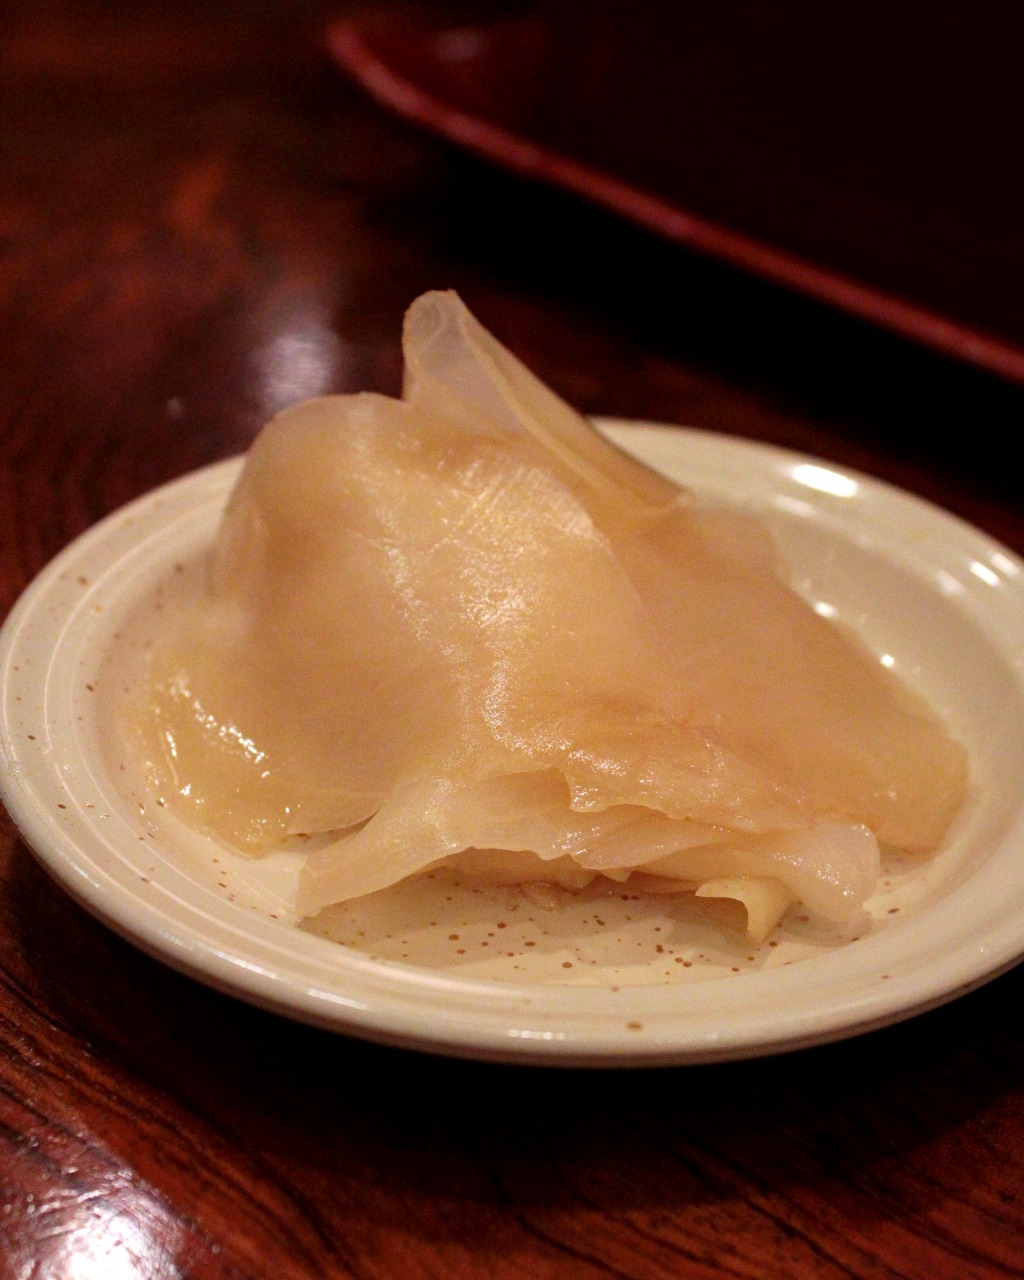 Gari is pickled ginger used to cleanse the tongue between sushi bites.